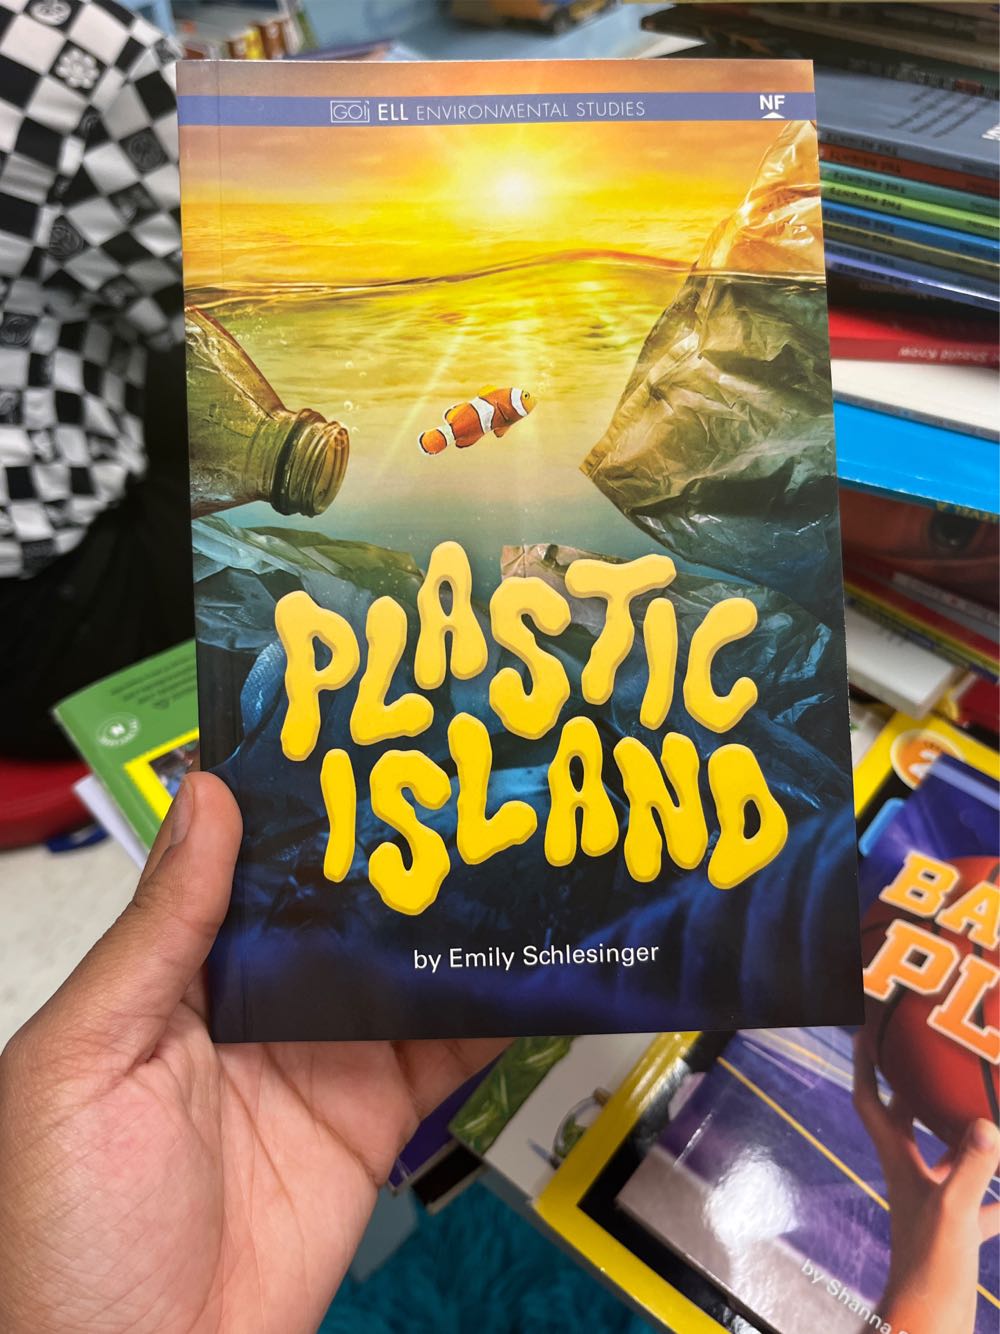 Plastic Island - Emily Schlesinger book collectible [Barcode 9781680219289] - Main Image 1